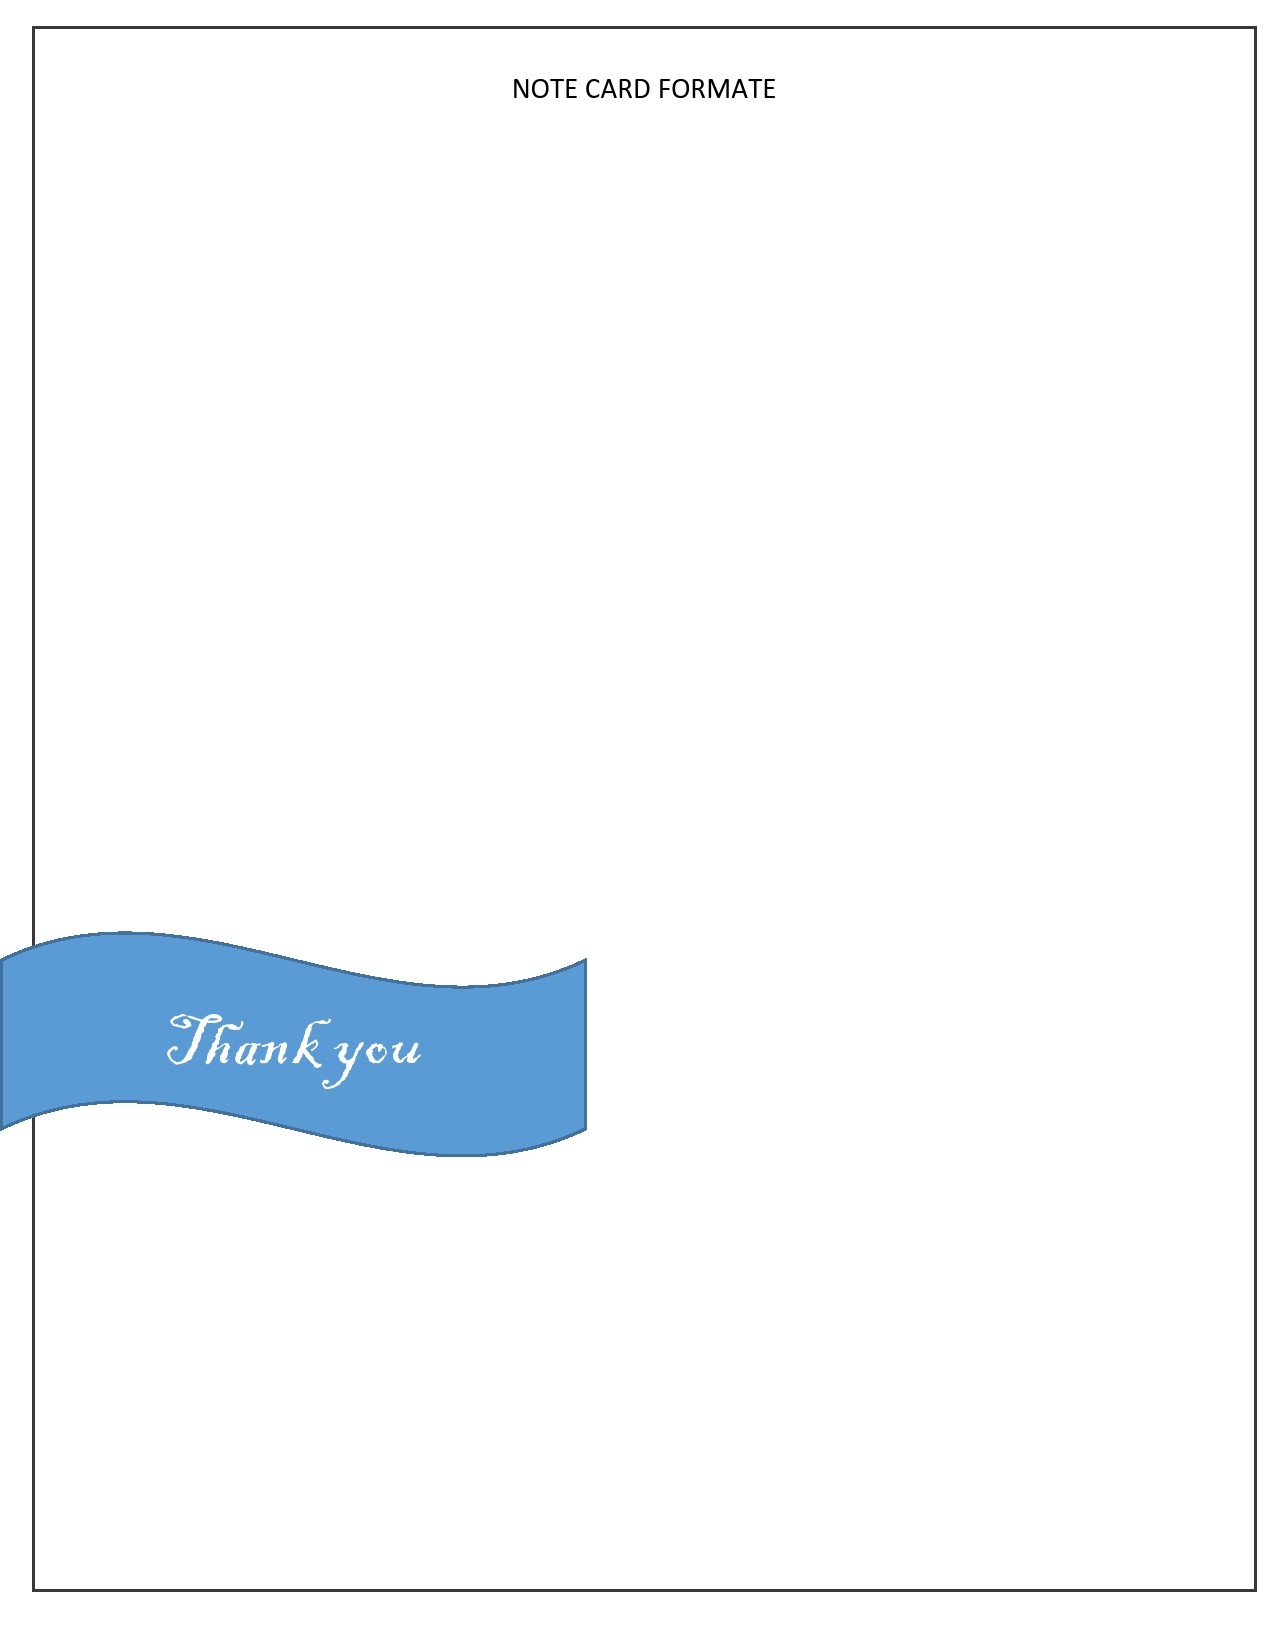 Free note card template 36